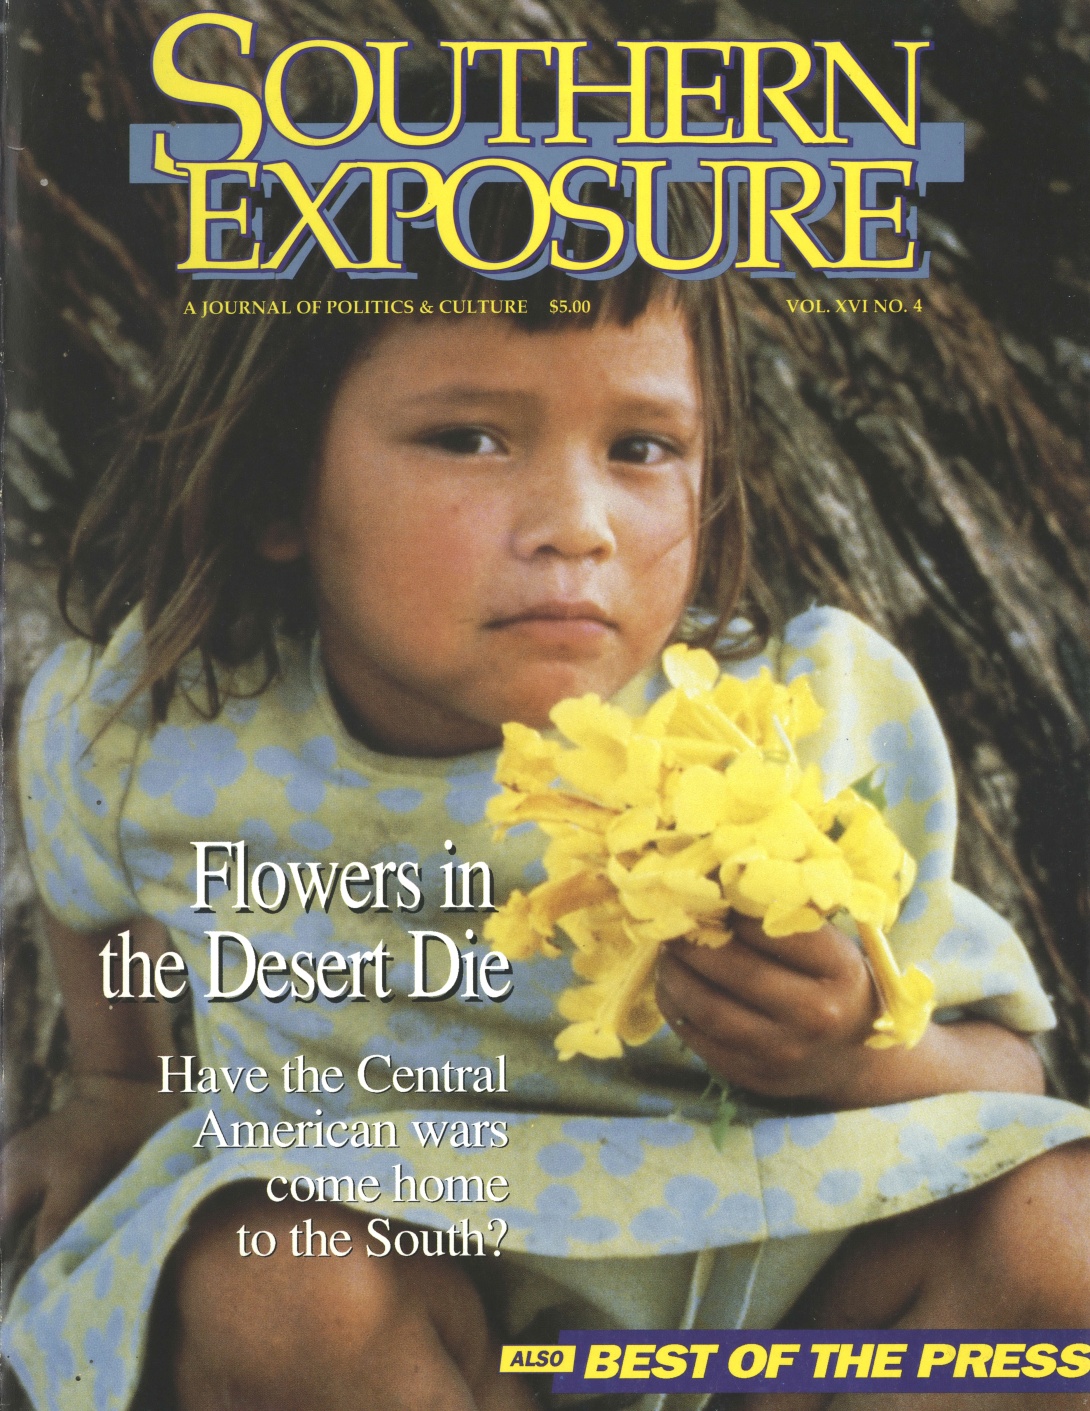 Magazine cover with small child holding yellow flowers, reading "Flowers in the Desert Die"